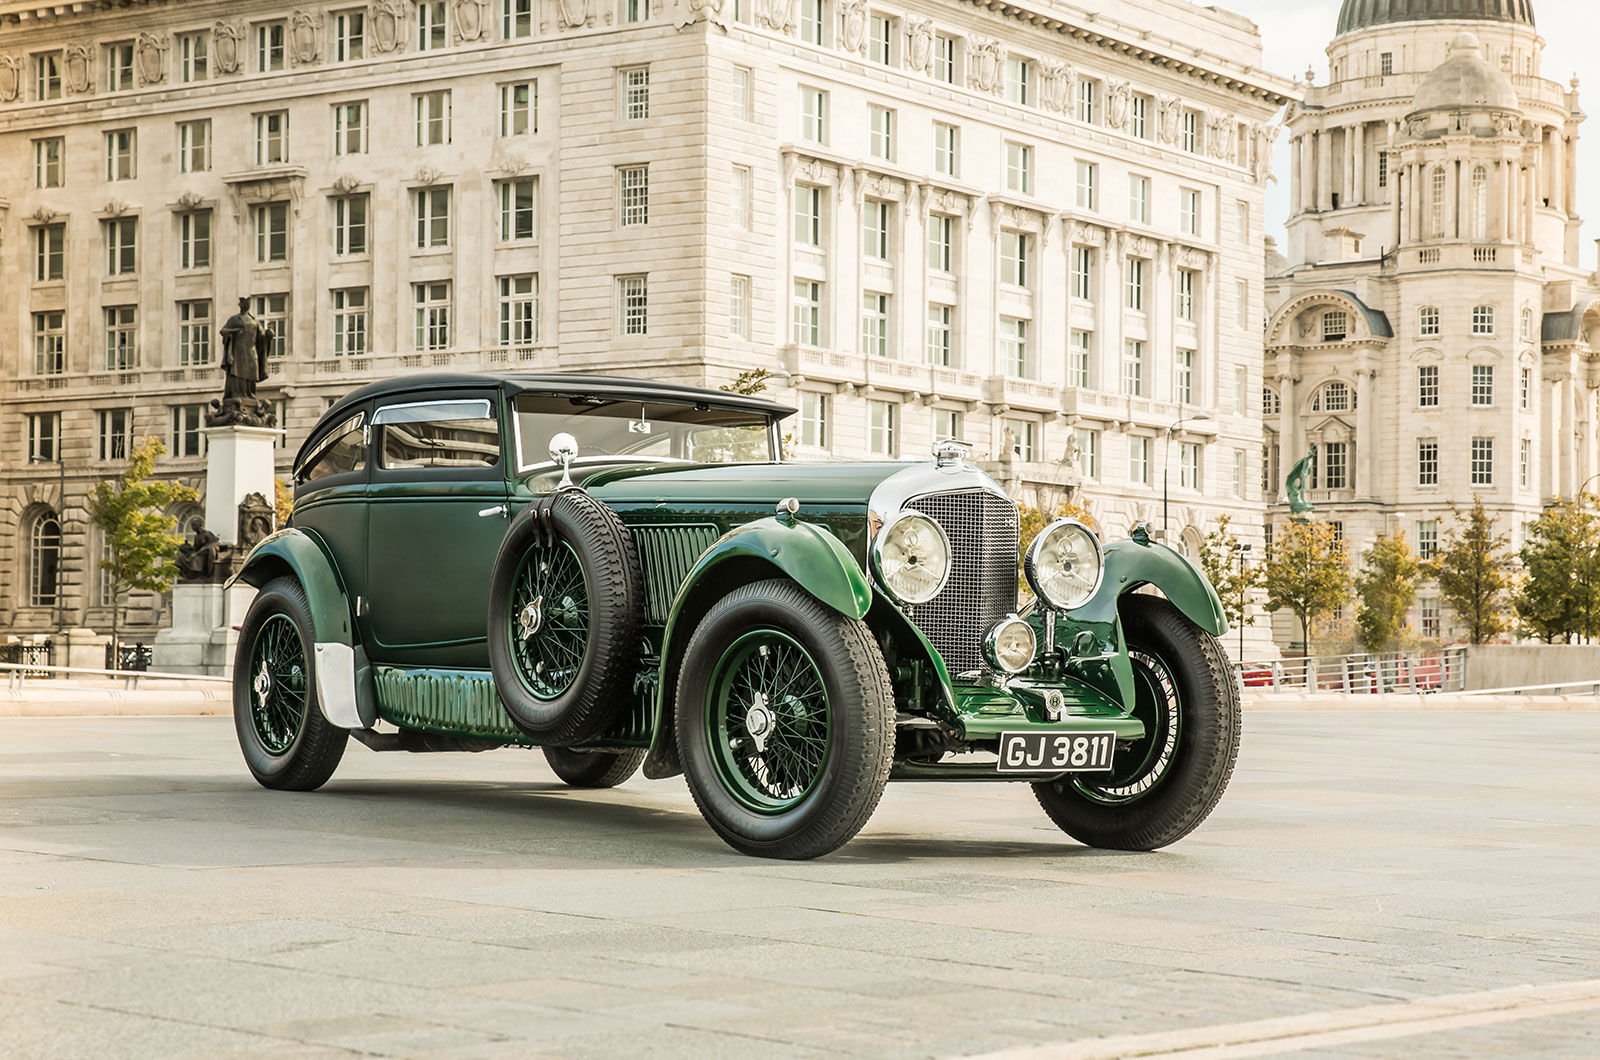 <p><span>When it arrived in 1926, the Bentley 6.5-Litre's specification was from another era. With its all-new <strong>6597cc </strong>overhead-cam straight-six engine, there were four valves for each cylinder. In standard form there was <strong>142 HP </strong>on tap, but when the Speed Six edition arrived in 1928, that had a huge <strong>182 HP</strong>.</span></p>